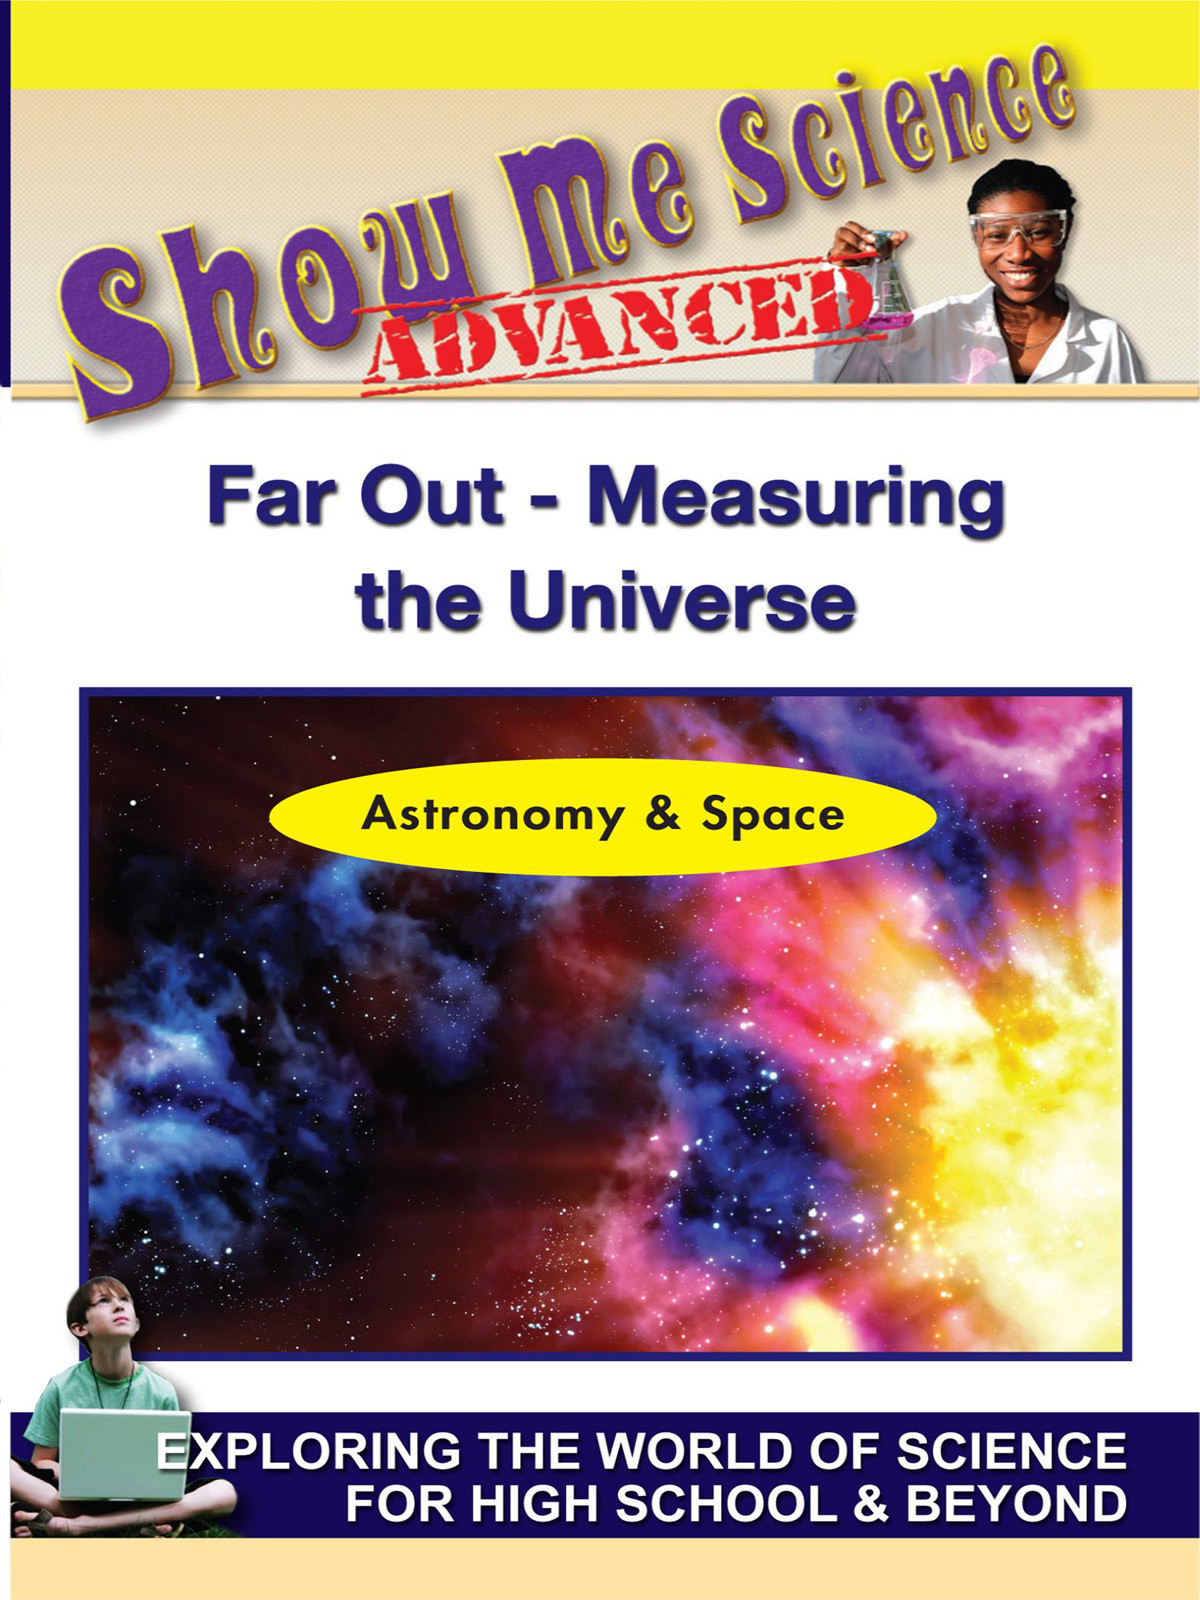 K4621 - Astronomy & Space  Far Out  Measuring the Universe